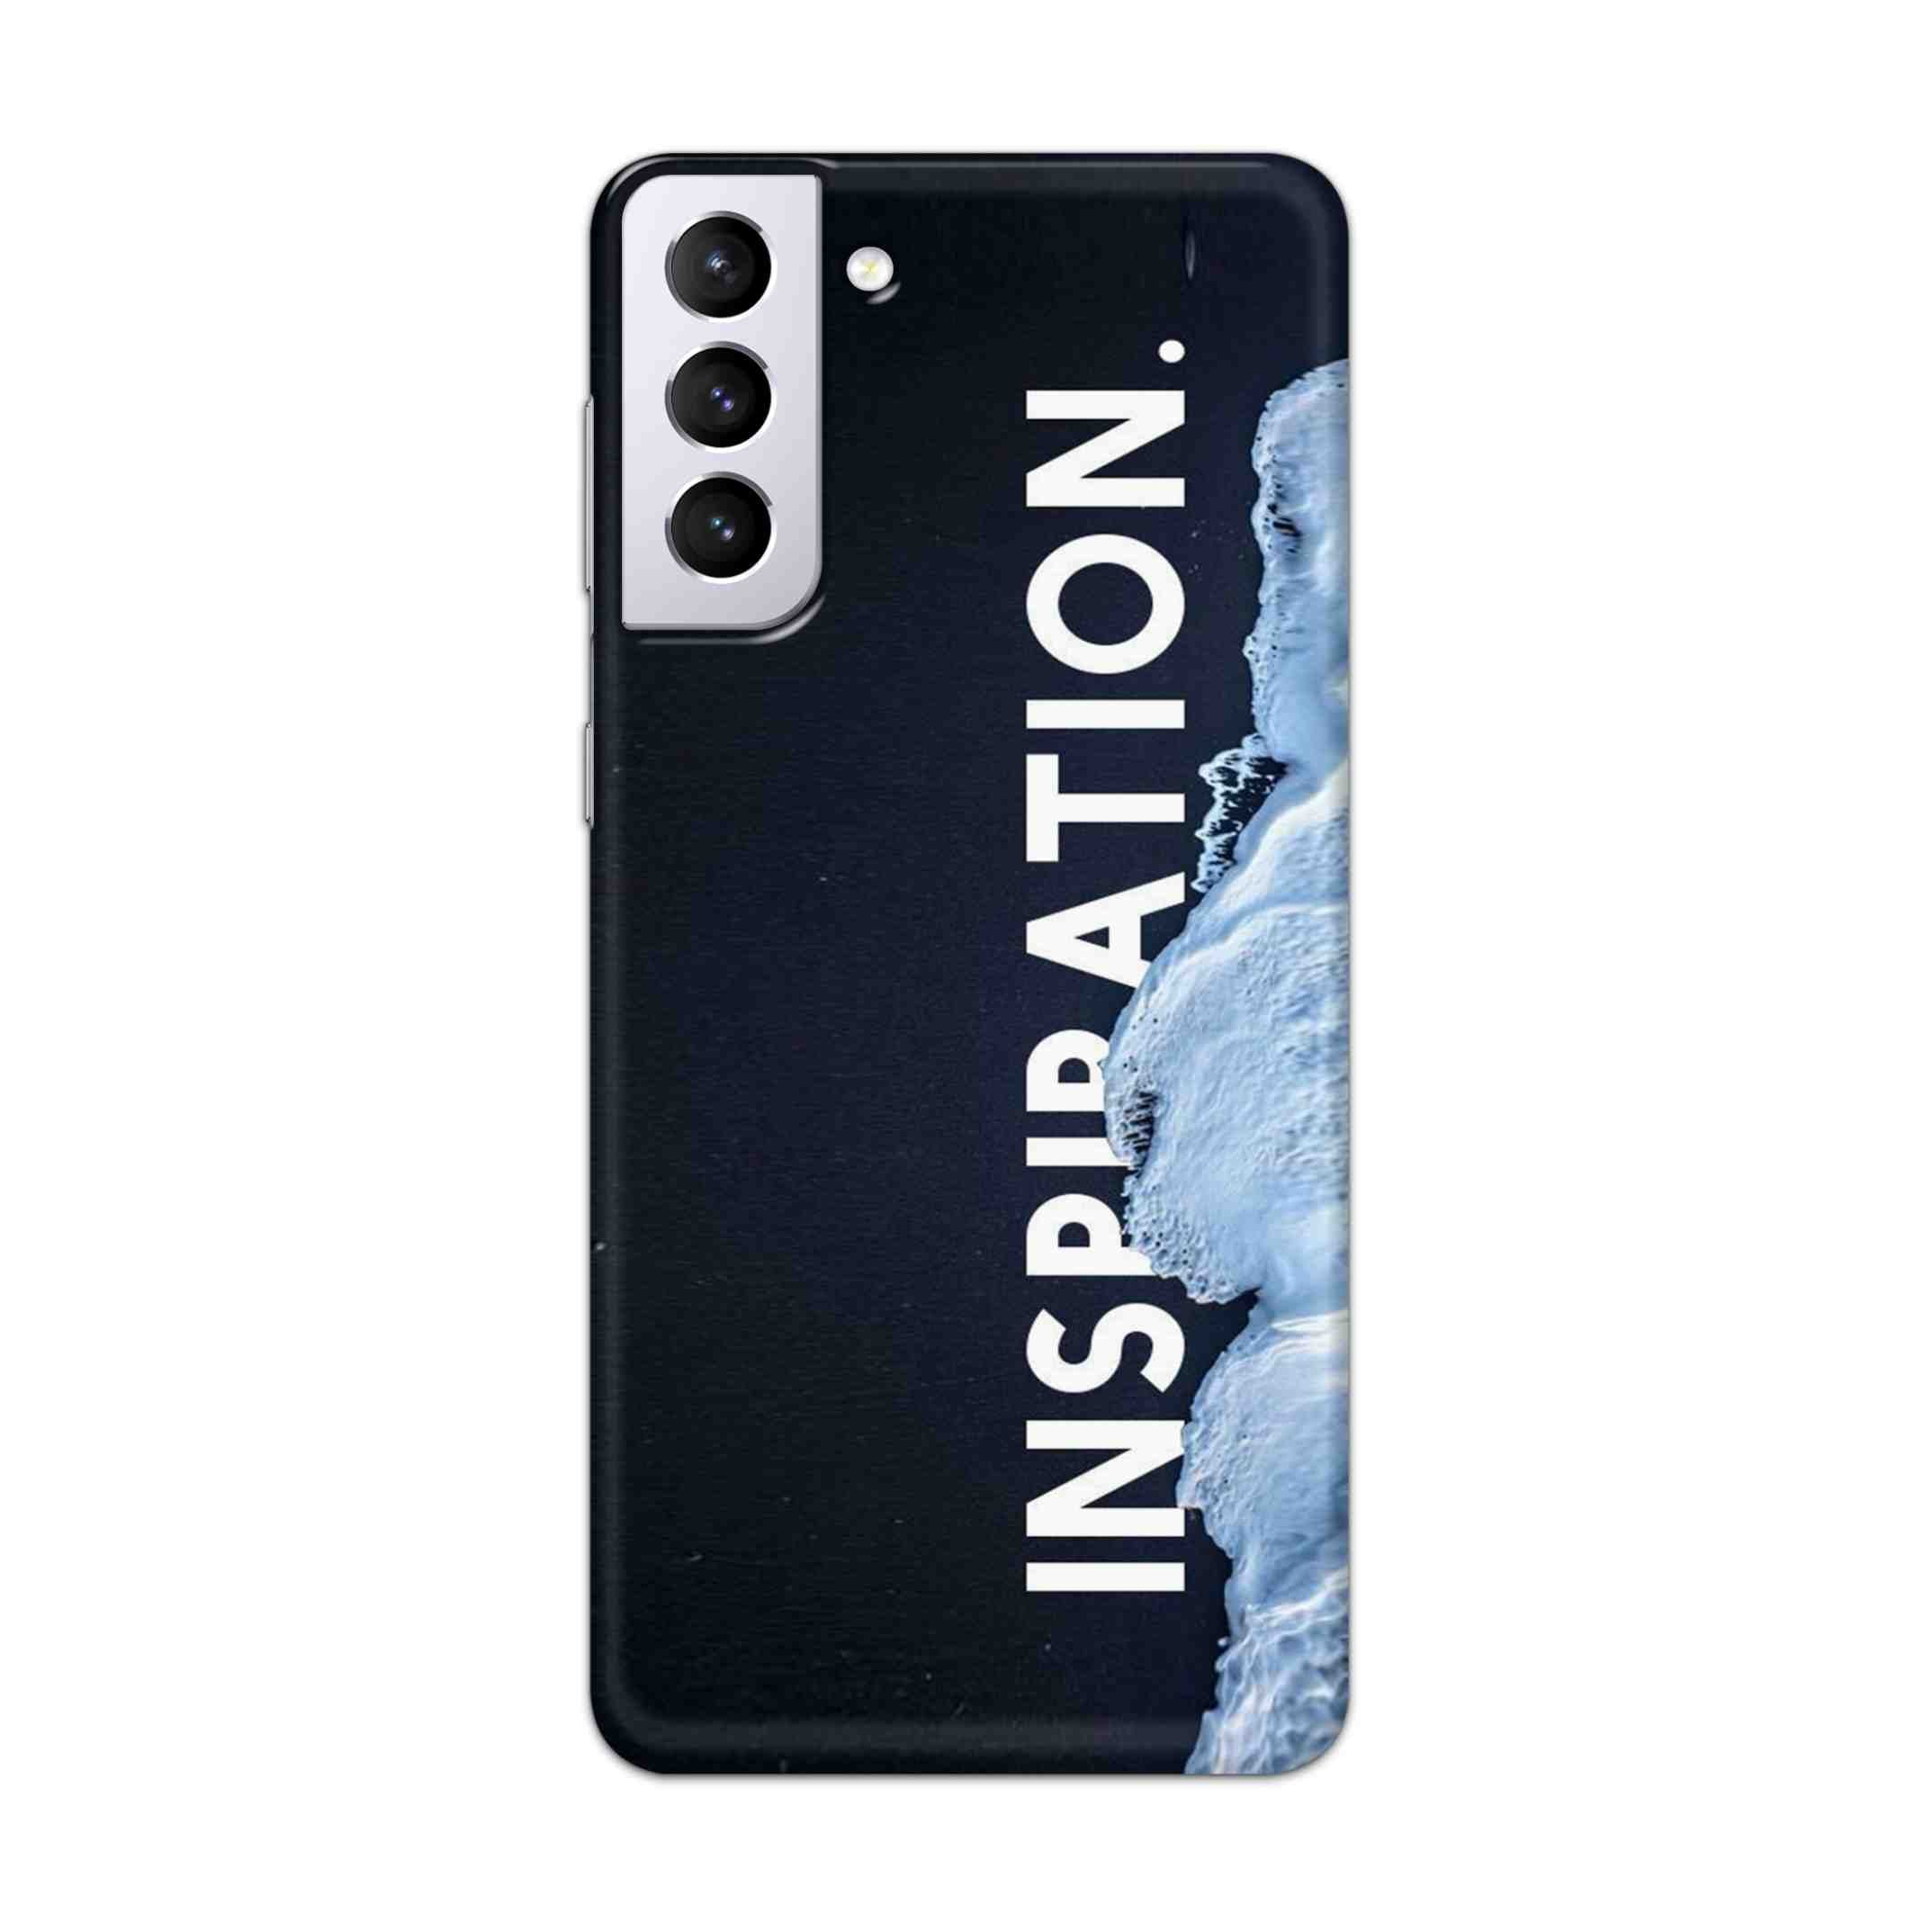 Buy Inspiration Hard Back Mobile Phone Case Cover For Samsung Galaxy S21 Plus Online